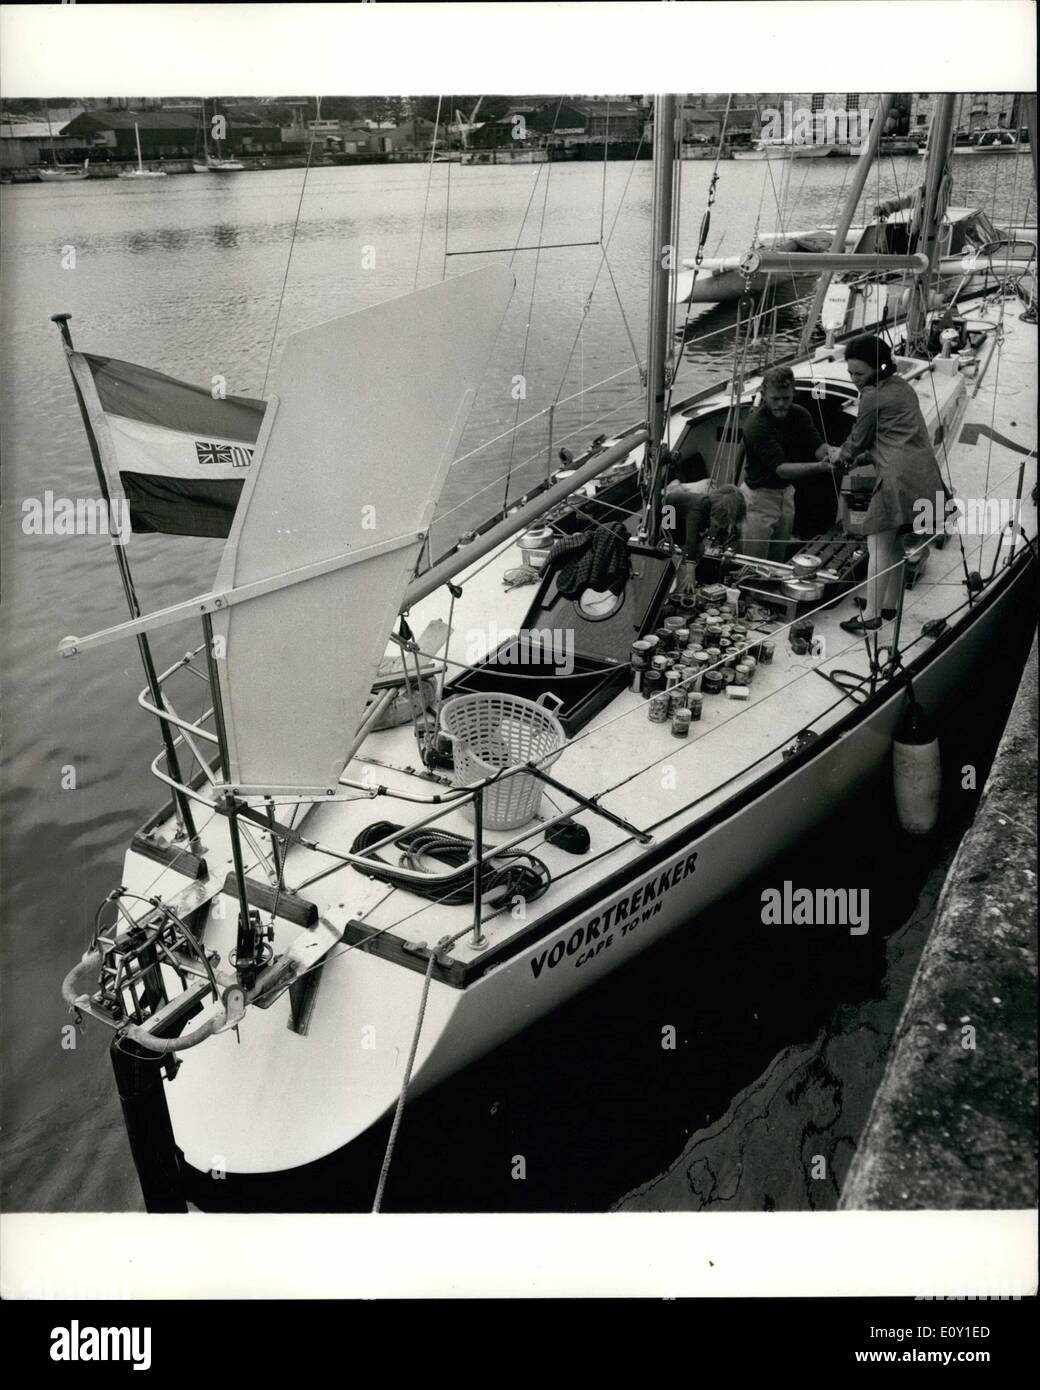 May 05, 1968 - Preparing to face the Atlantic Alone: On Saturday (June 1), 43 yachts from 10 countries, with 3,000 miles of lonely Atlantic ahead of them set out from Plymouth single-handed for Newport, Rhode Island. Yesterday yachtsmen were stowing gear and stores in readiness for the start. Photo shows the 50 ft. ketch Voortrekker, one of the favourites, from South Africa, was being victualled by Mr. Bruce Dalling, with the help of his sister, Mrs. Carols Charmier, and her daughter, Emmy. Stock Photo